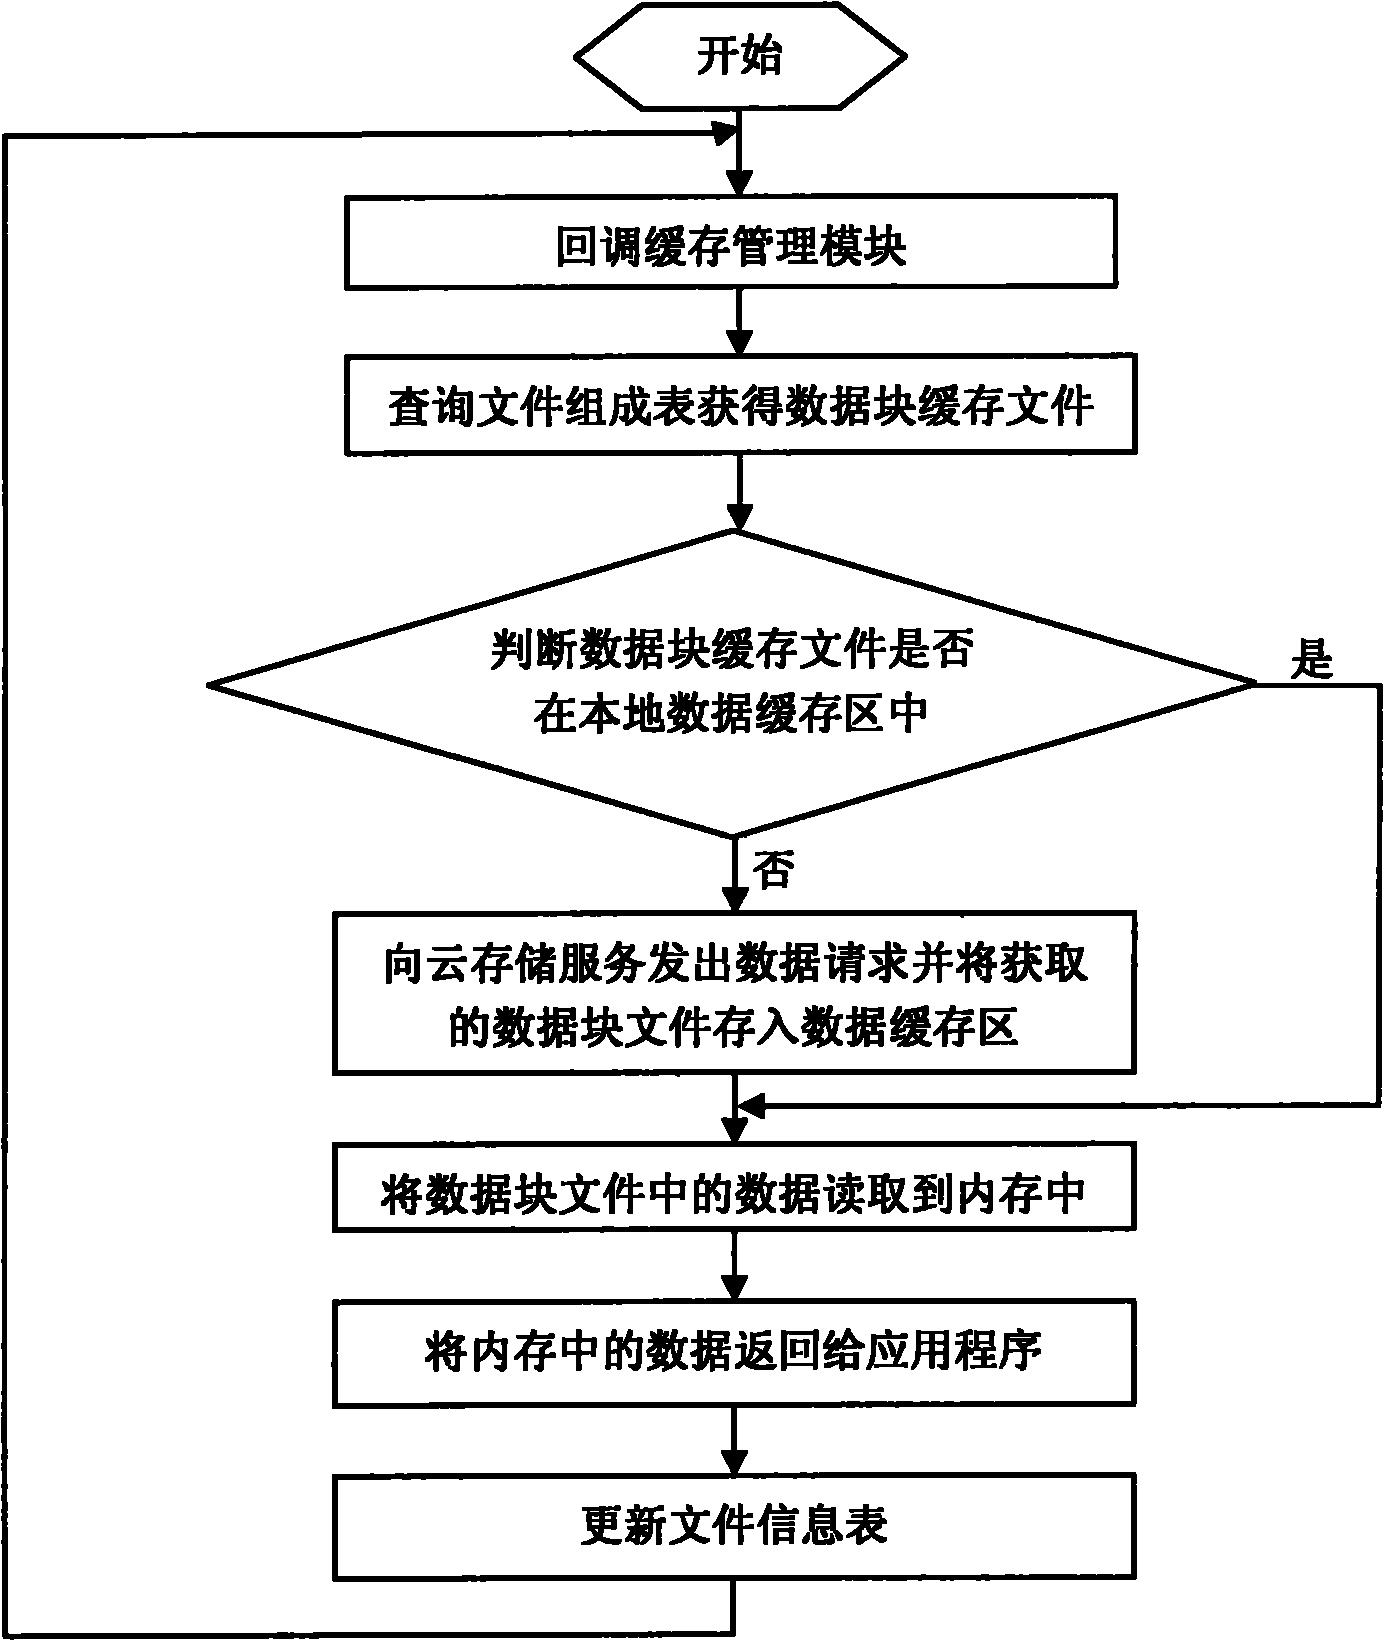 Data caching method of cloud storage system